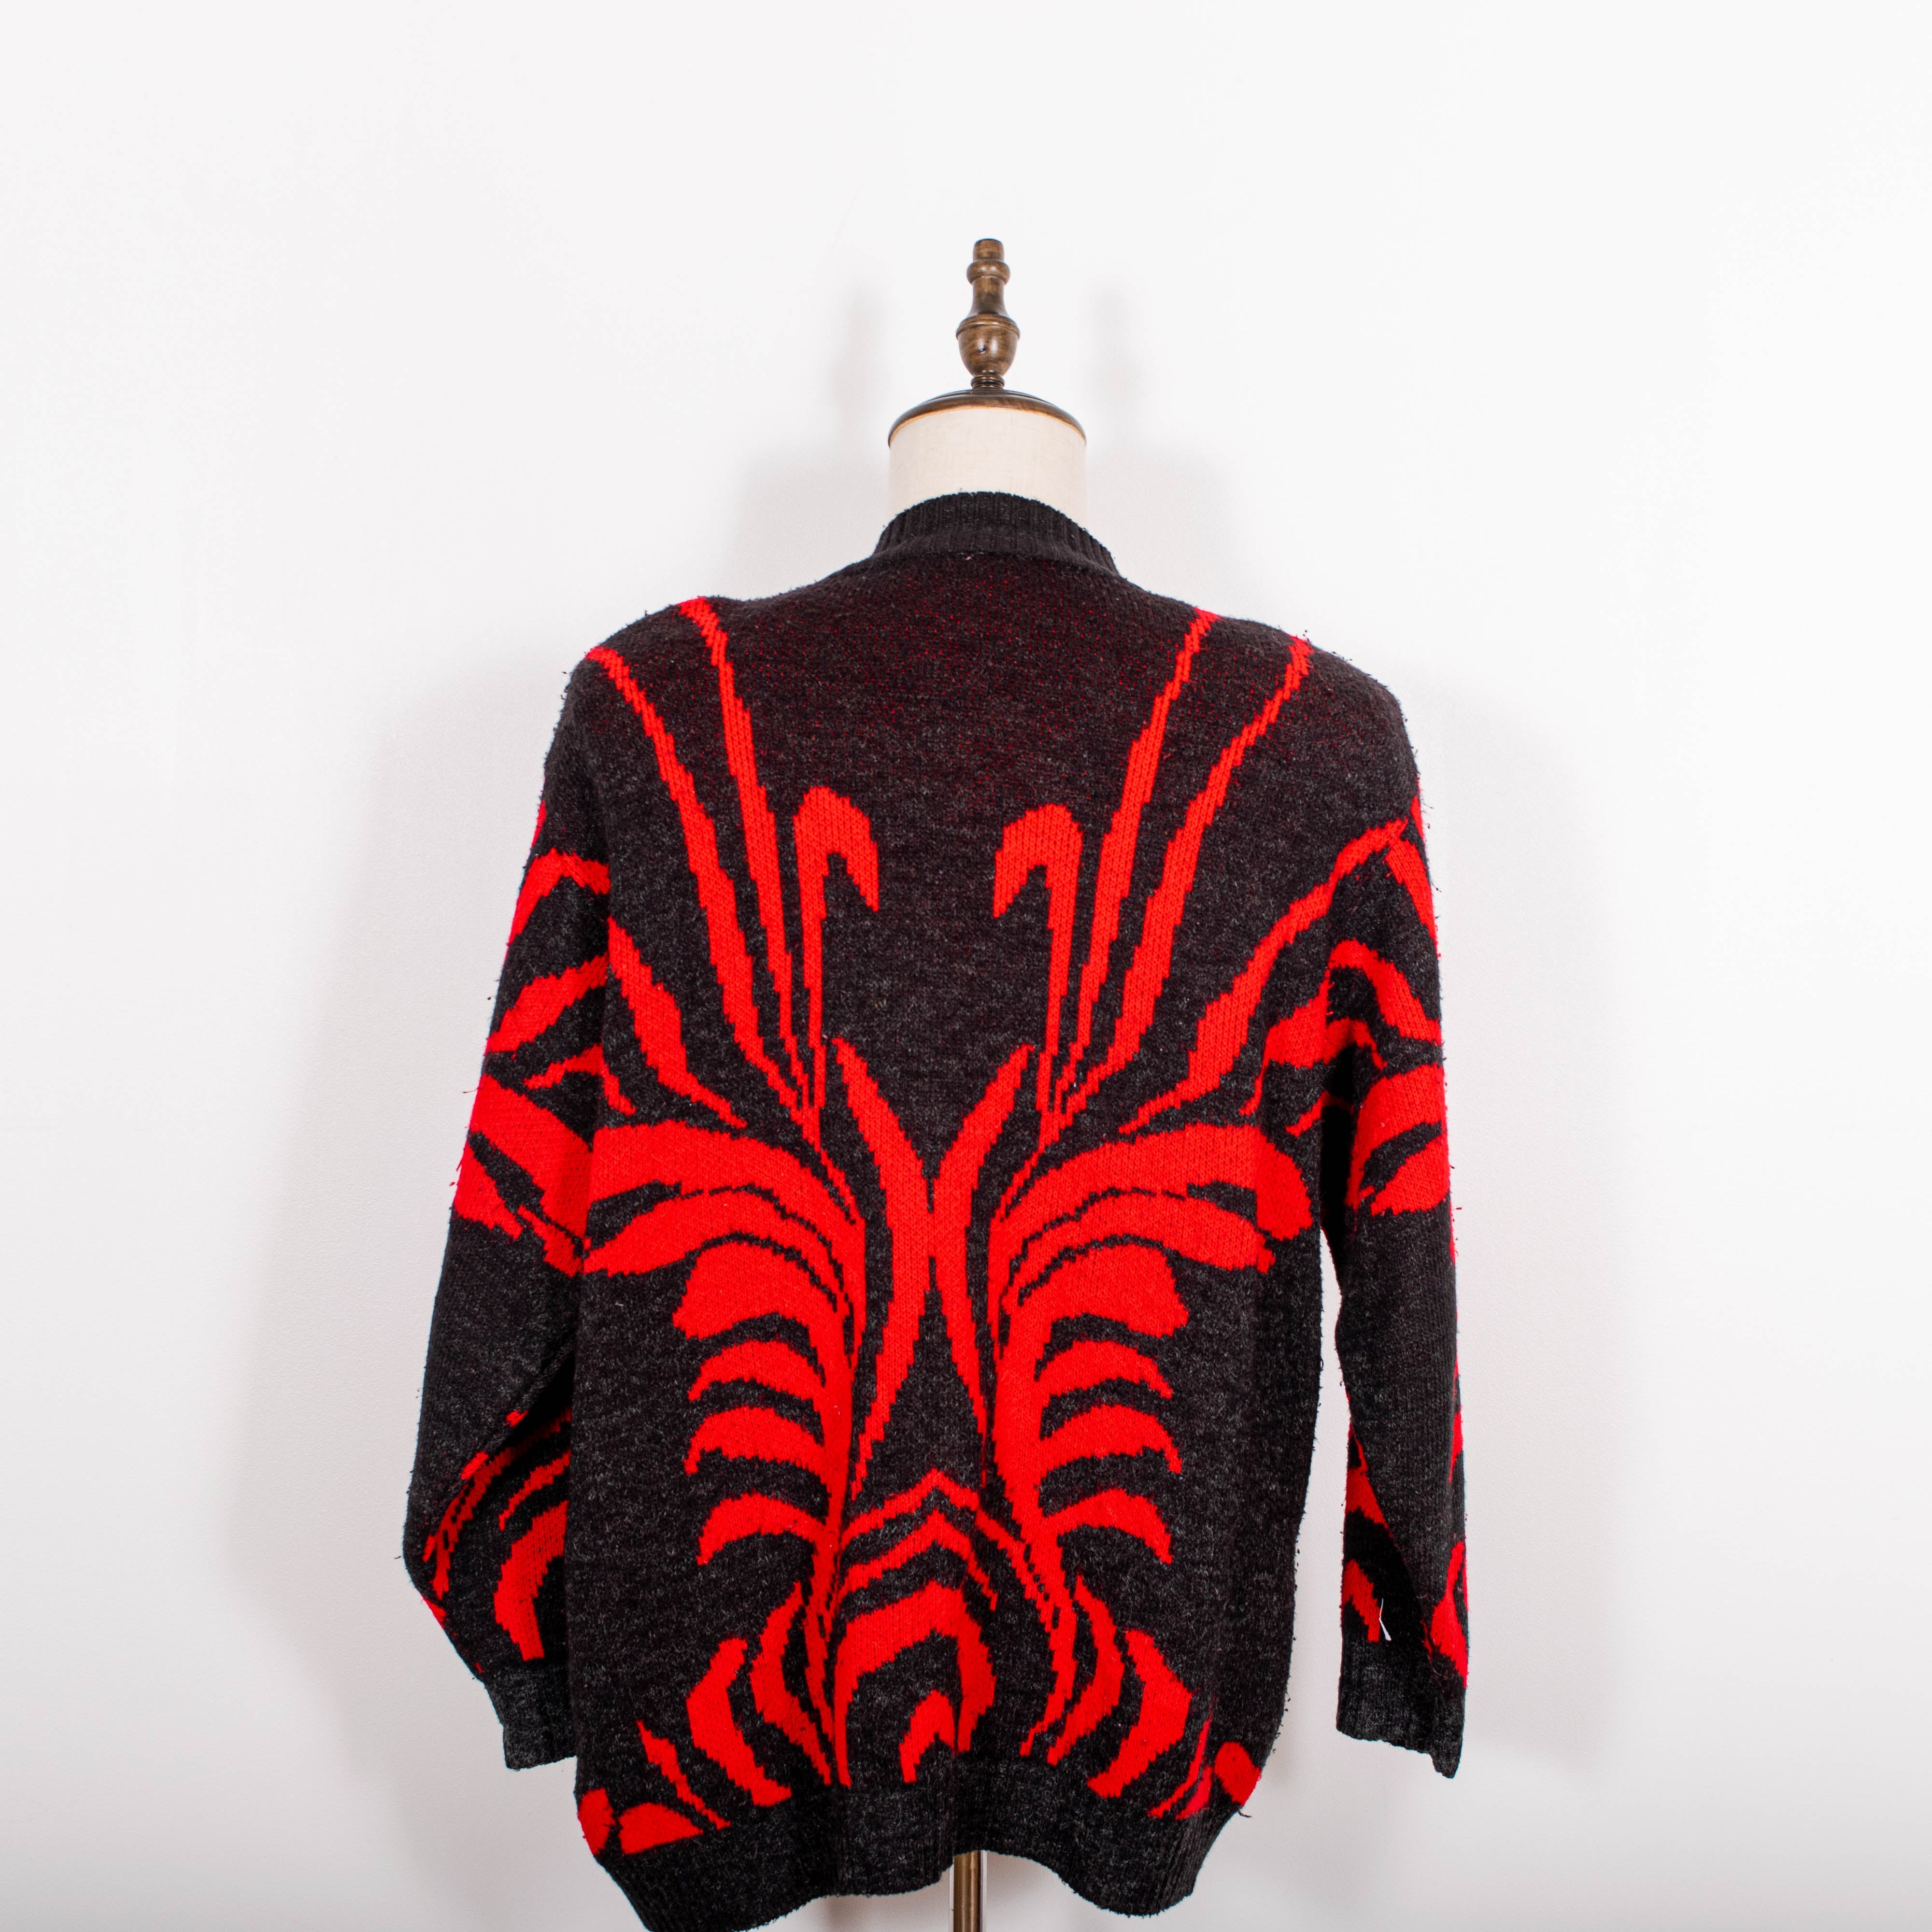 Vintage Black Red Abstract Wool Blend Cardigan Sweater Mens S